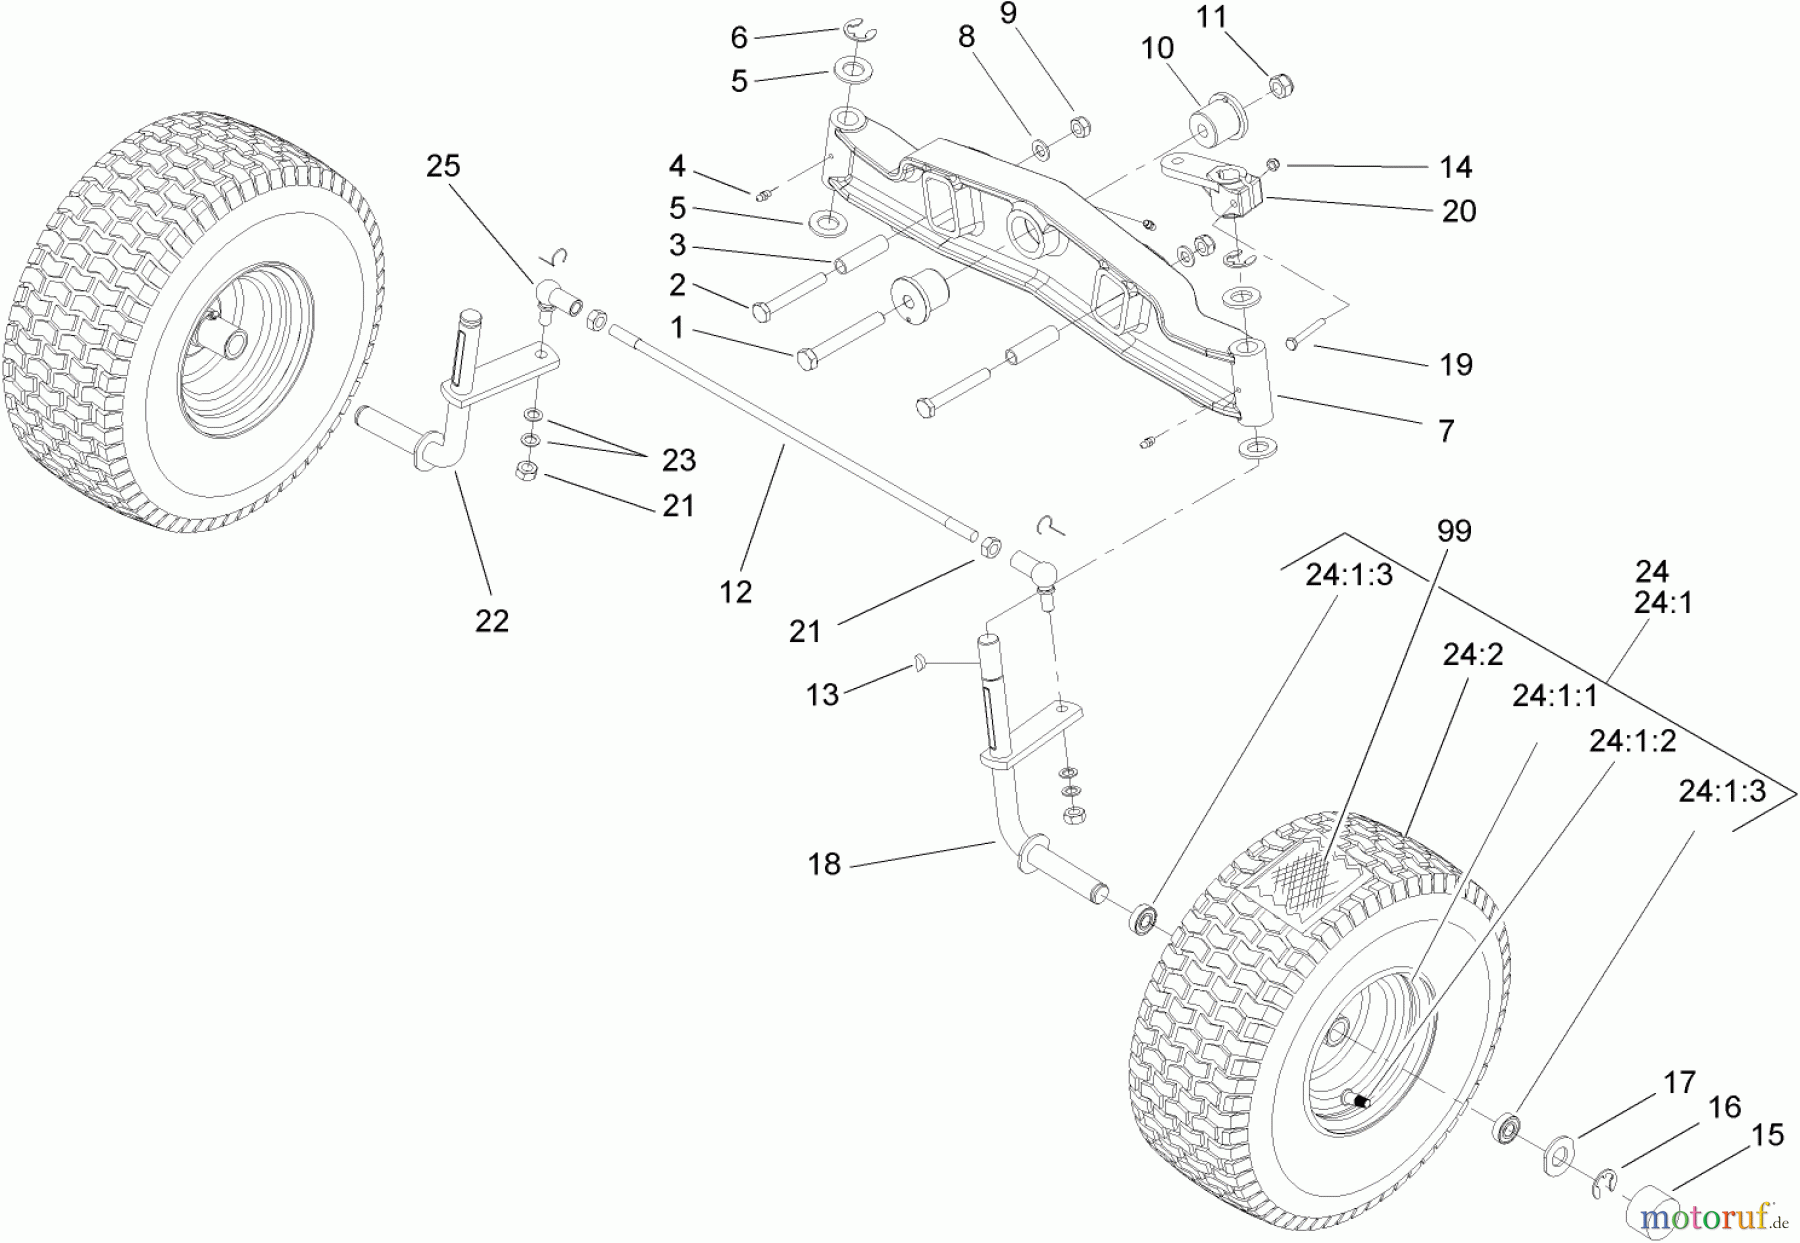  Toro Neu Mowers, Lawn & Garden Tractor Seite 1 74571 (DH 200) - Toro DH 200 Lawn Tractor, 2005 (250000001-250999999) FRONT AXLE ASSEMBLY